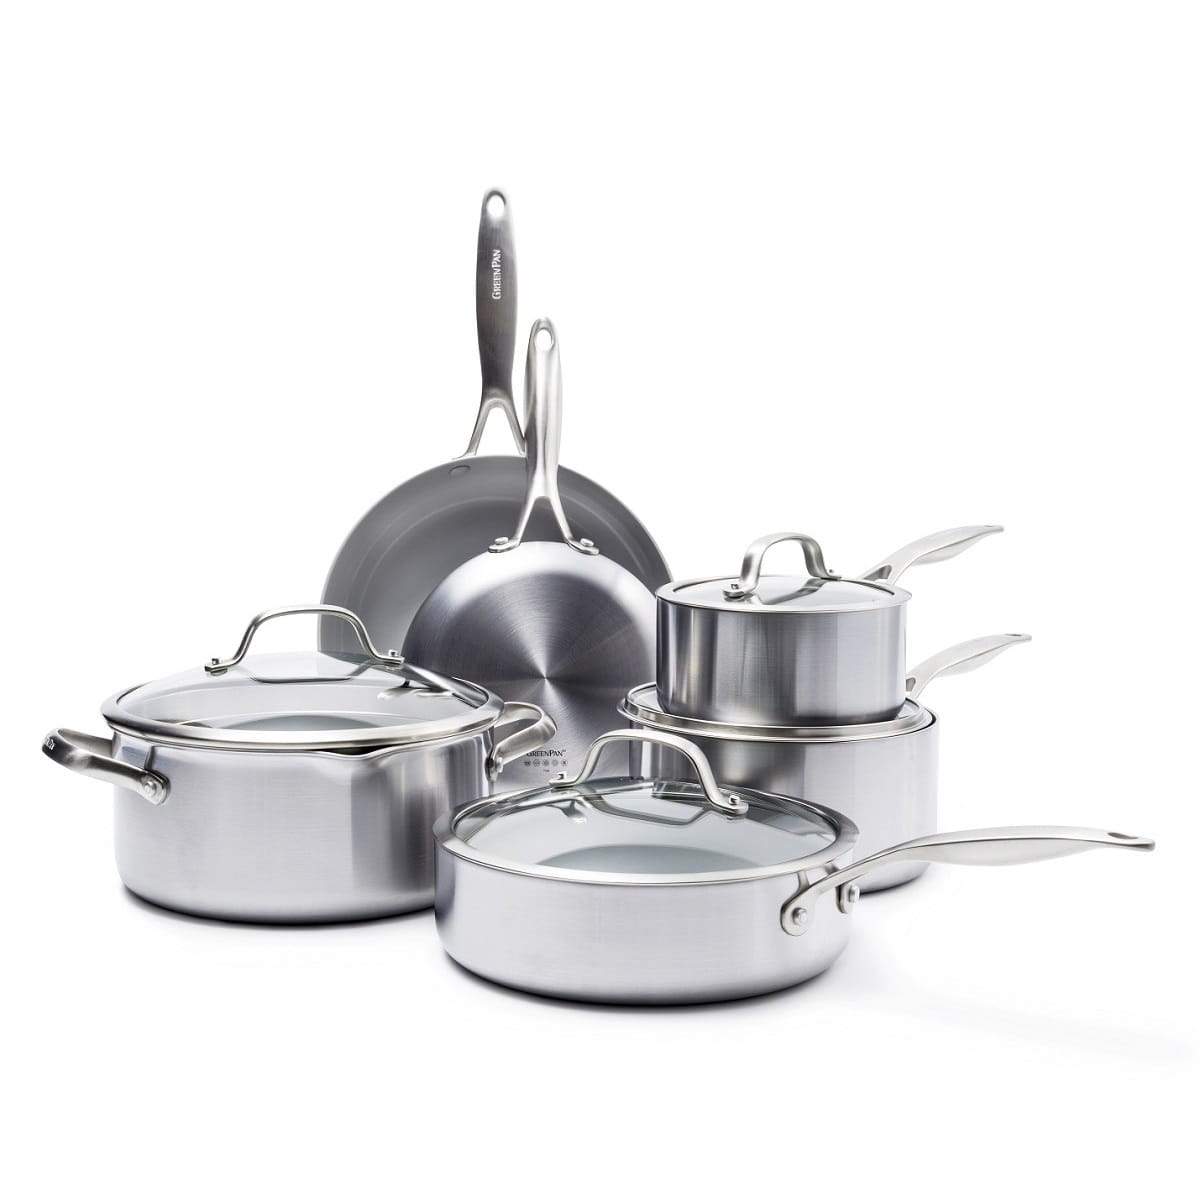 CC000018-001 - Venice Pro 10pc Cookware Sets, Stainless Steel - Product Image 1